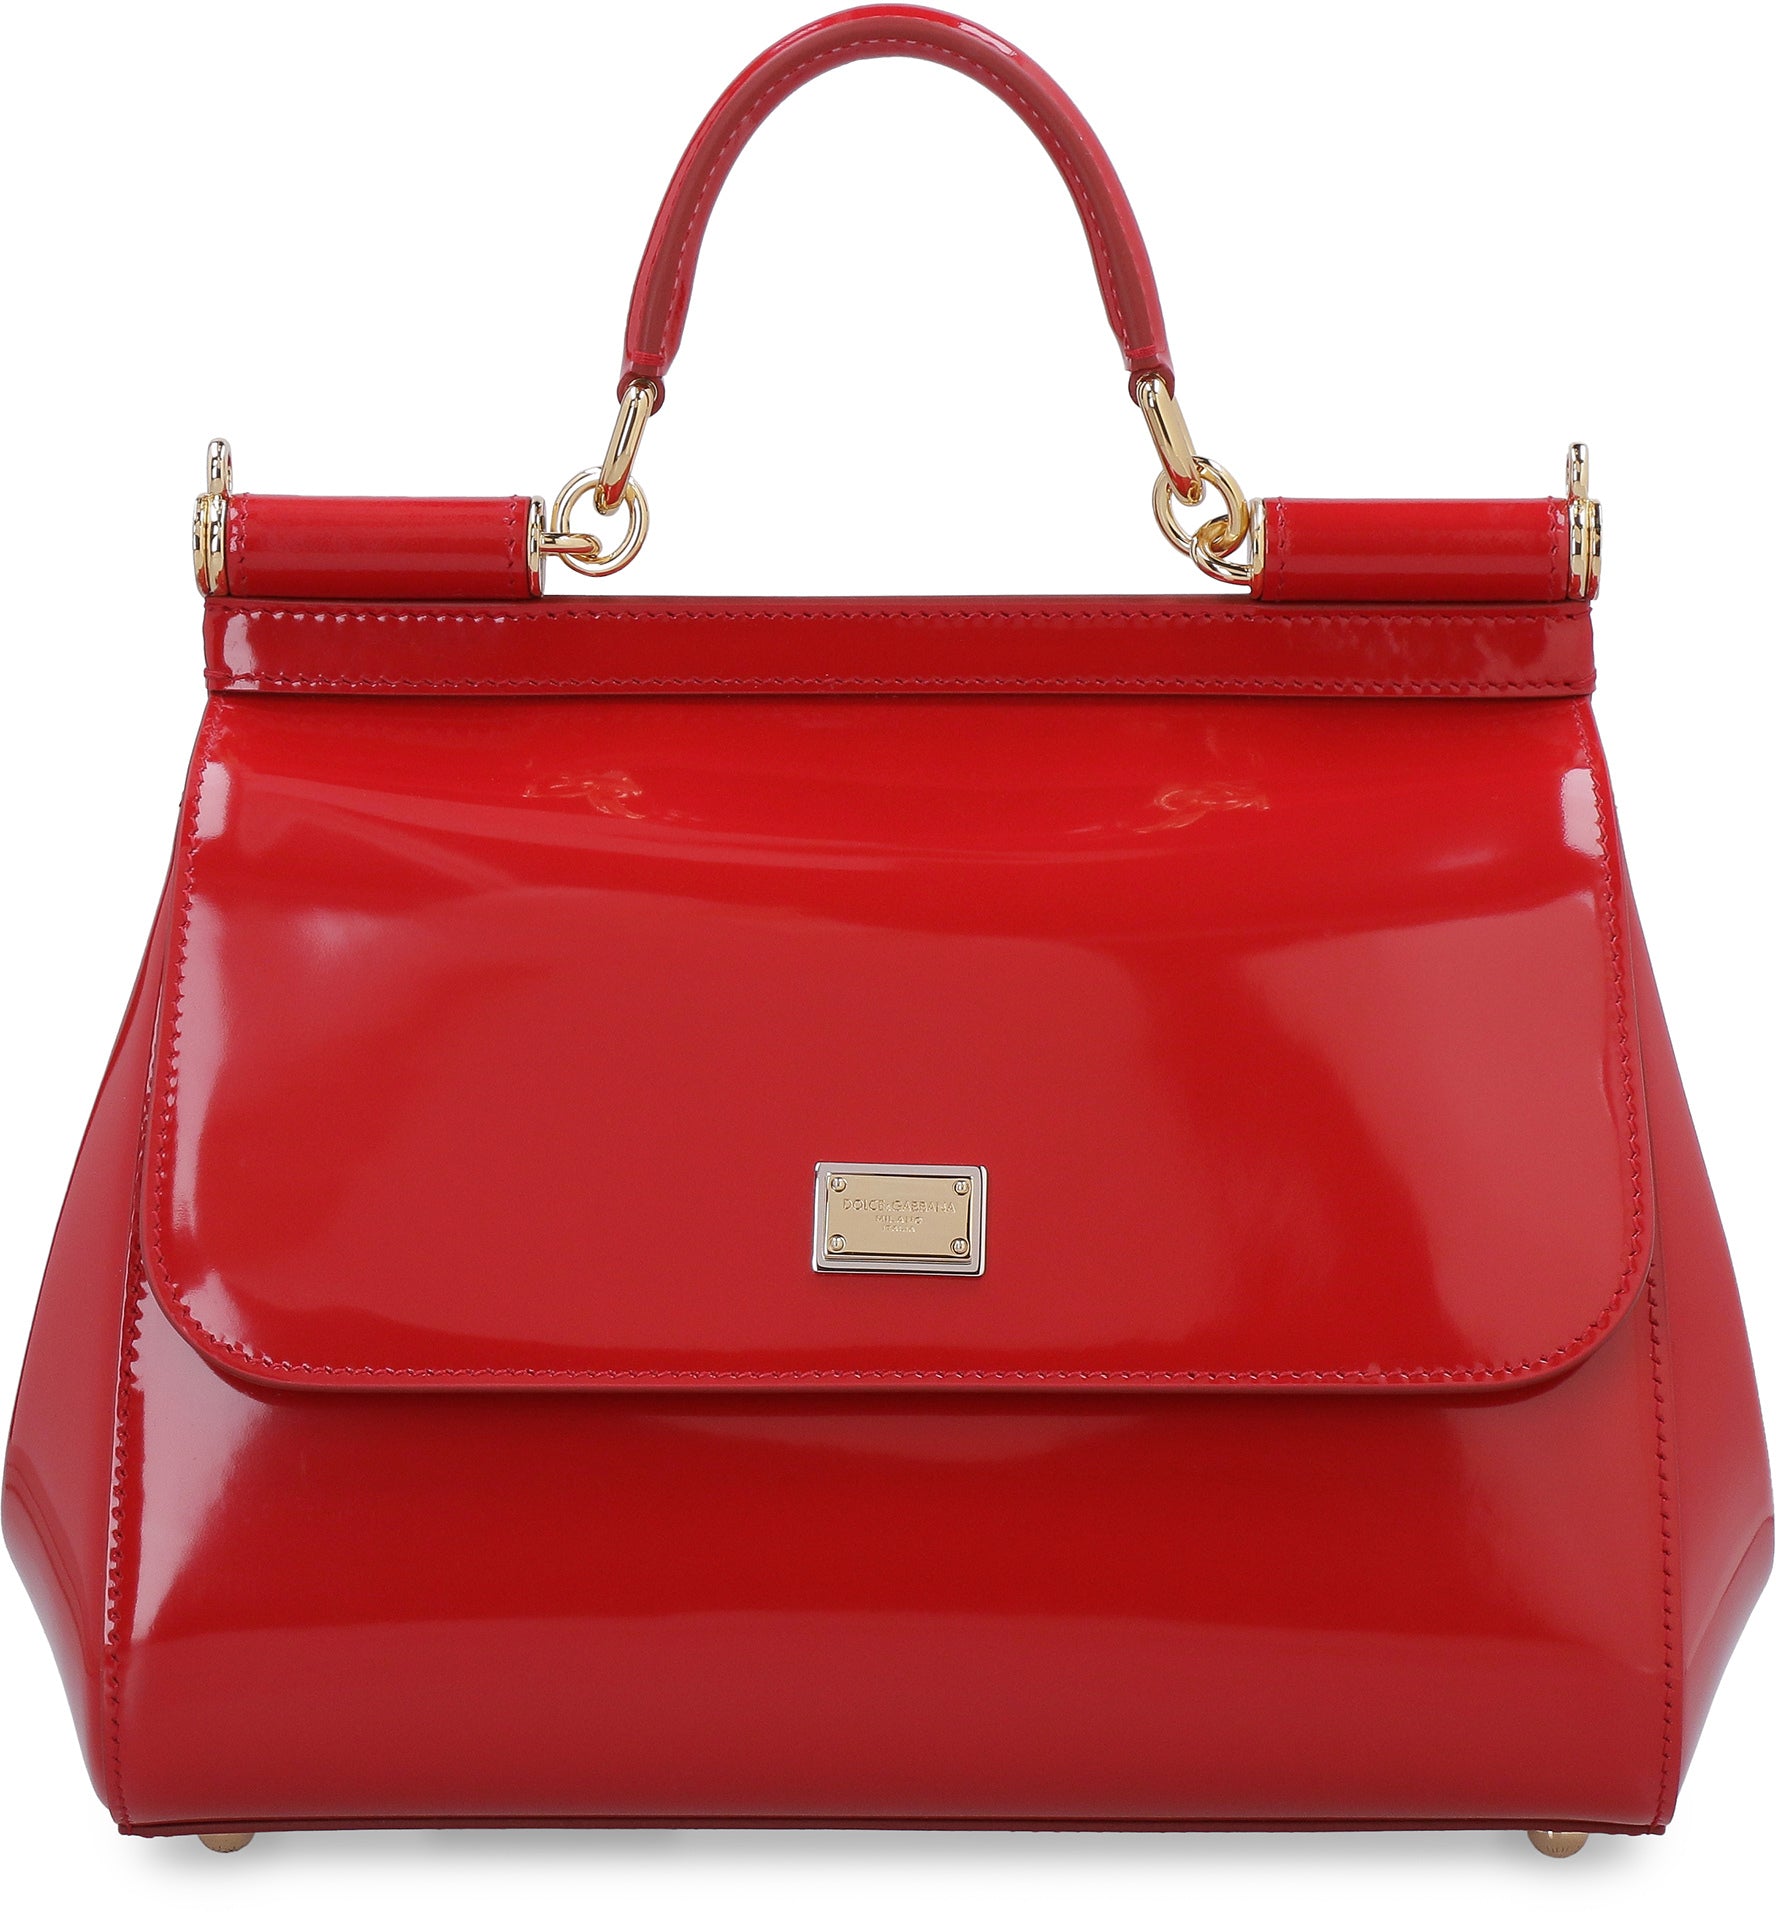 DOLCE & GABBANA: Sicily bag in patent leather - Red  Dolce & Gabbana  clutch EB0003A1067 online at